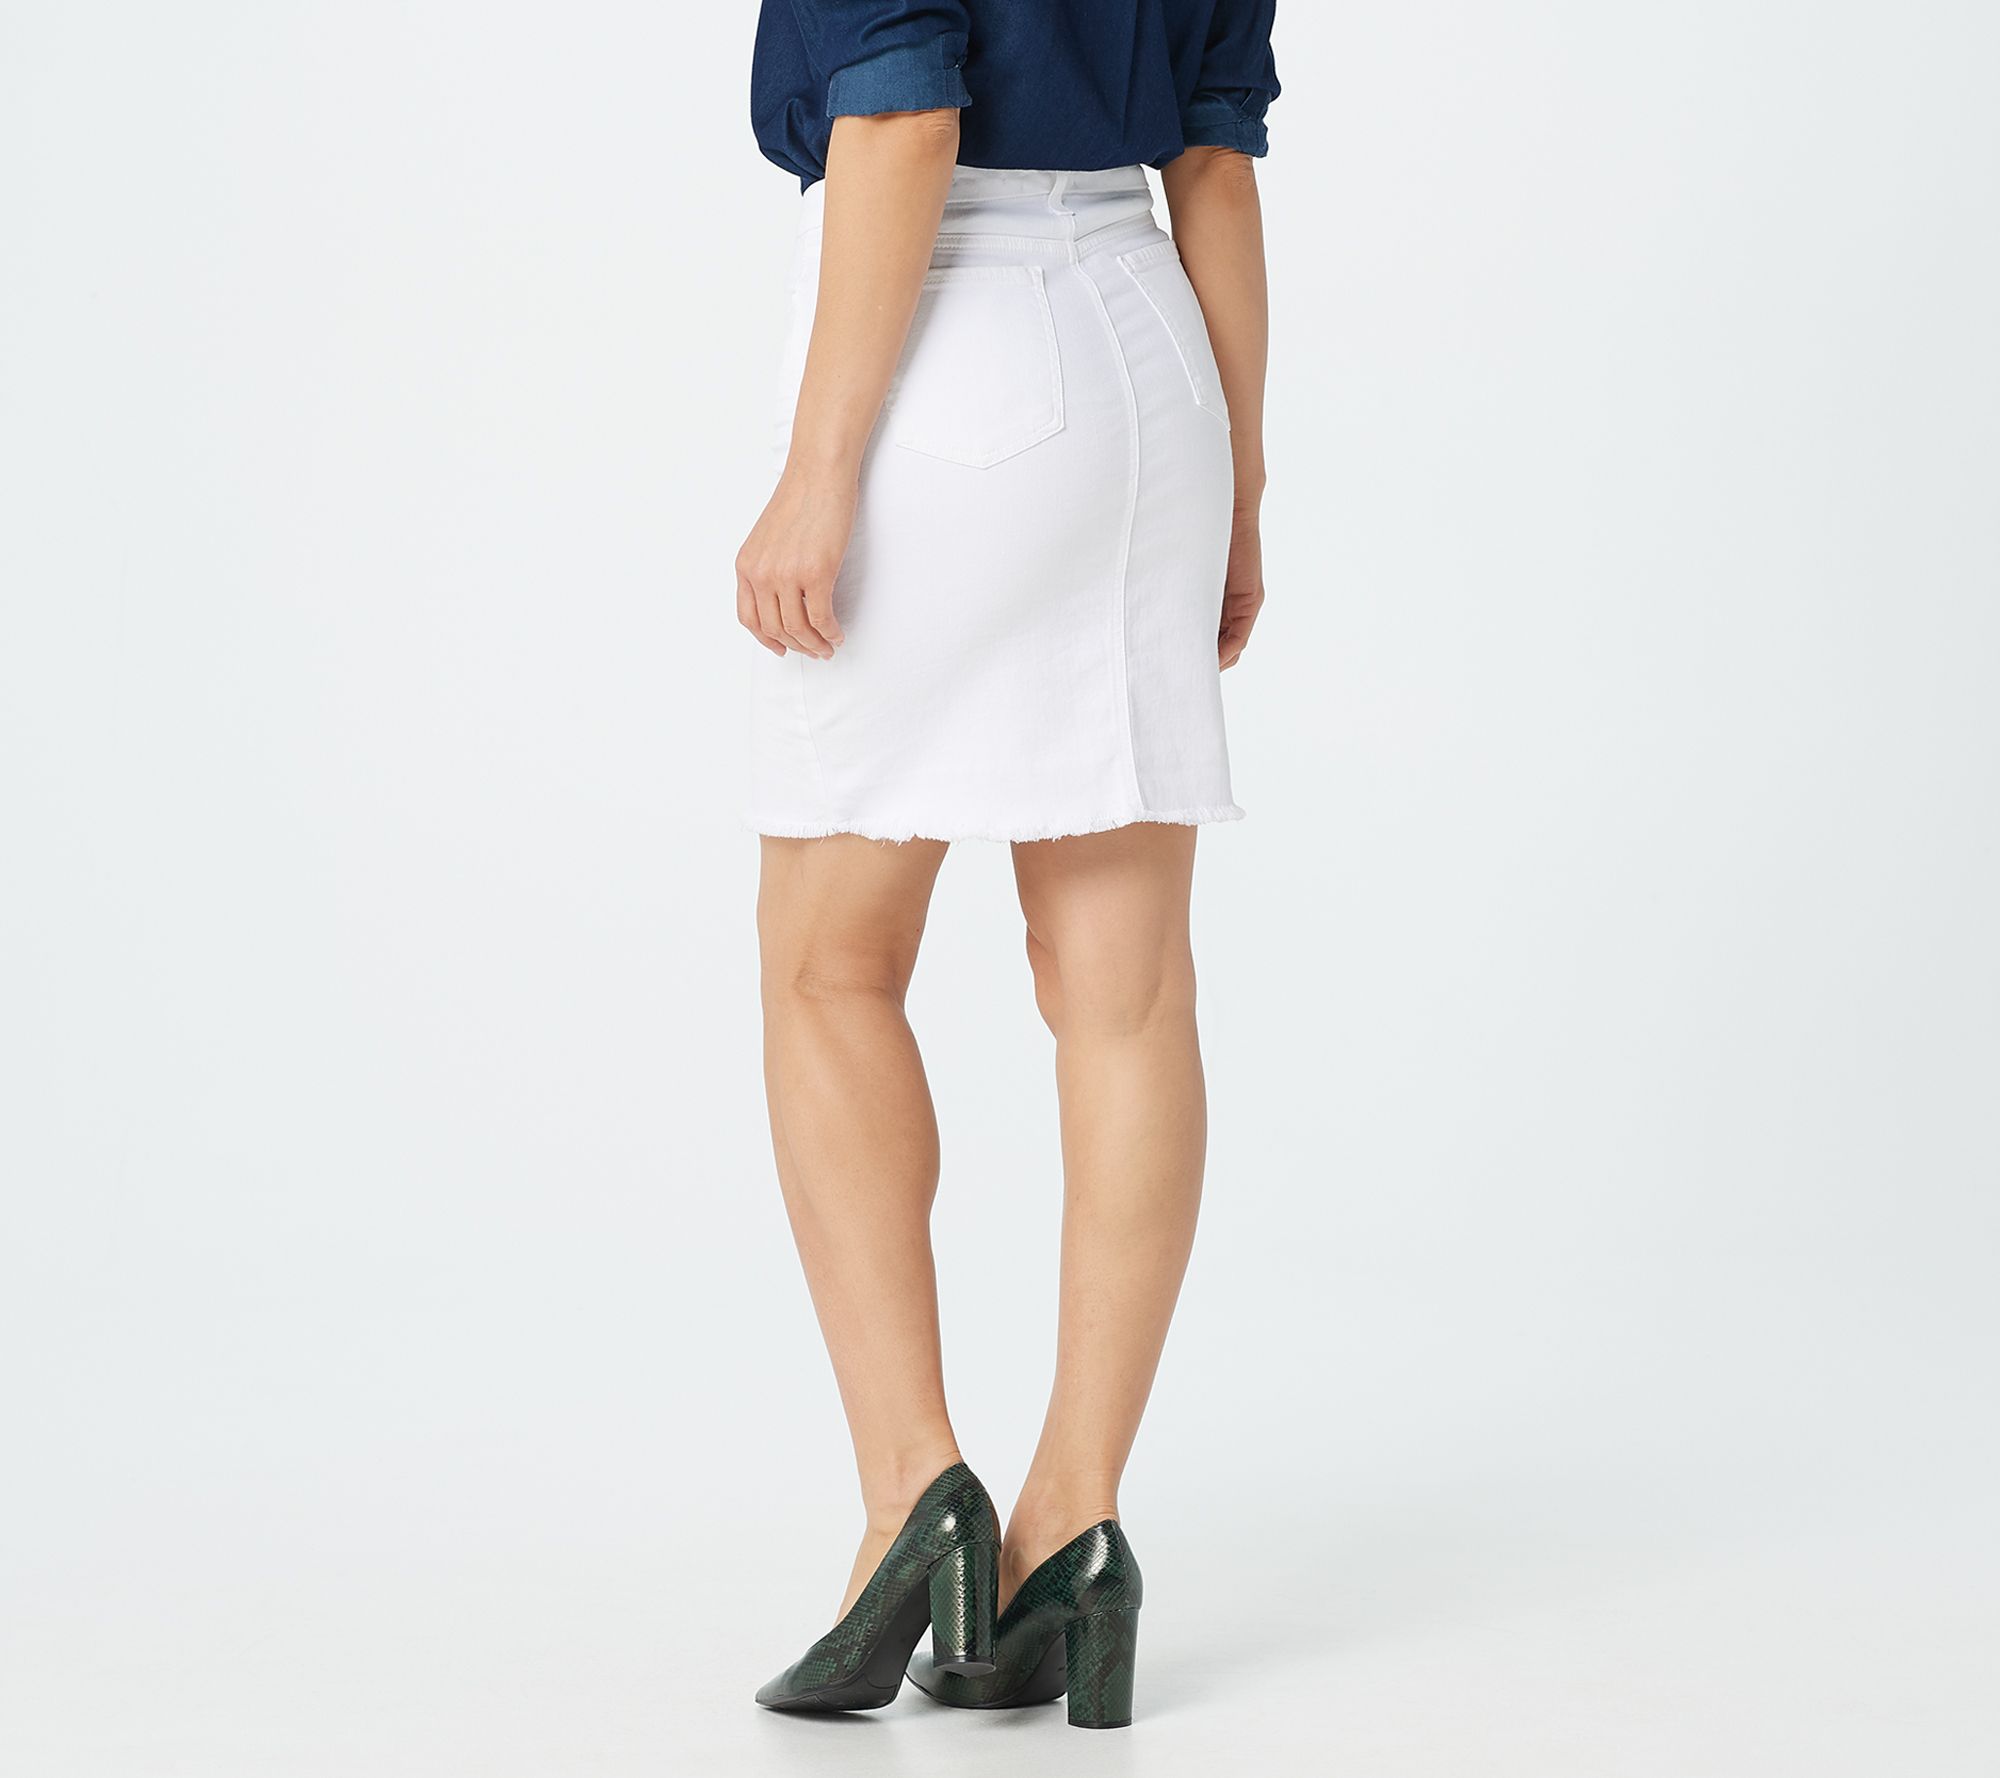 Jen7 by 7 for All Mankind Pencil Skirt with Frayed hem - White - QVC.com